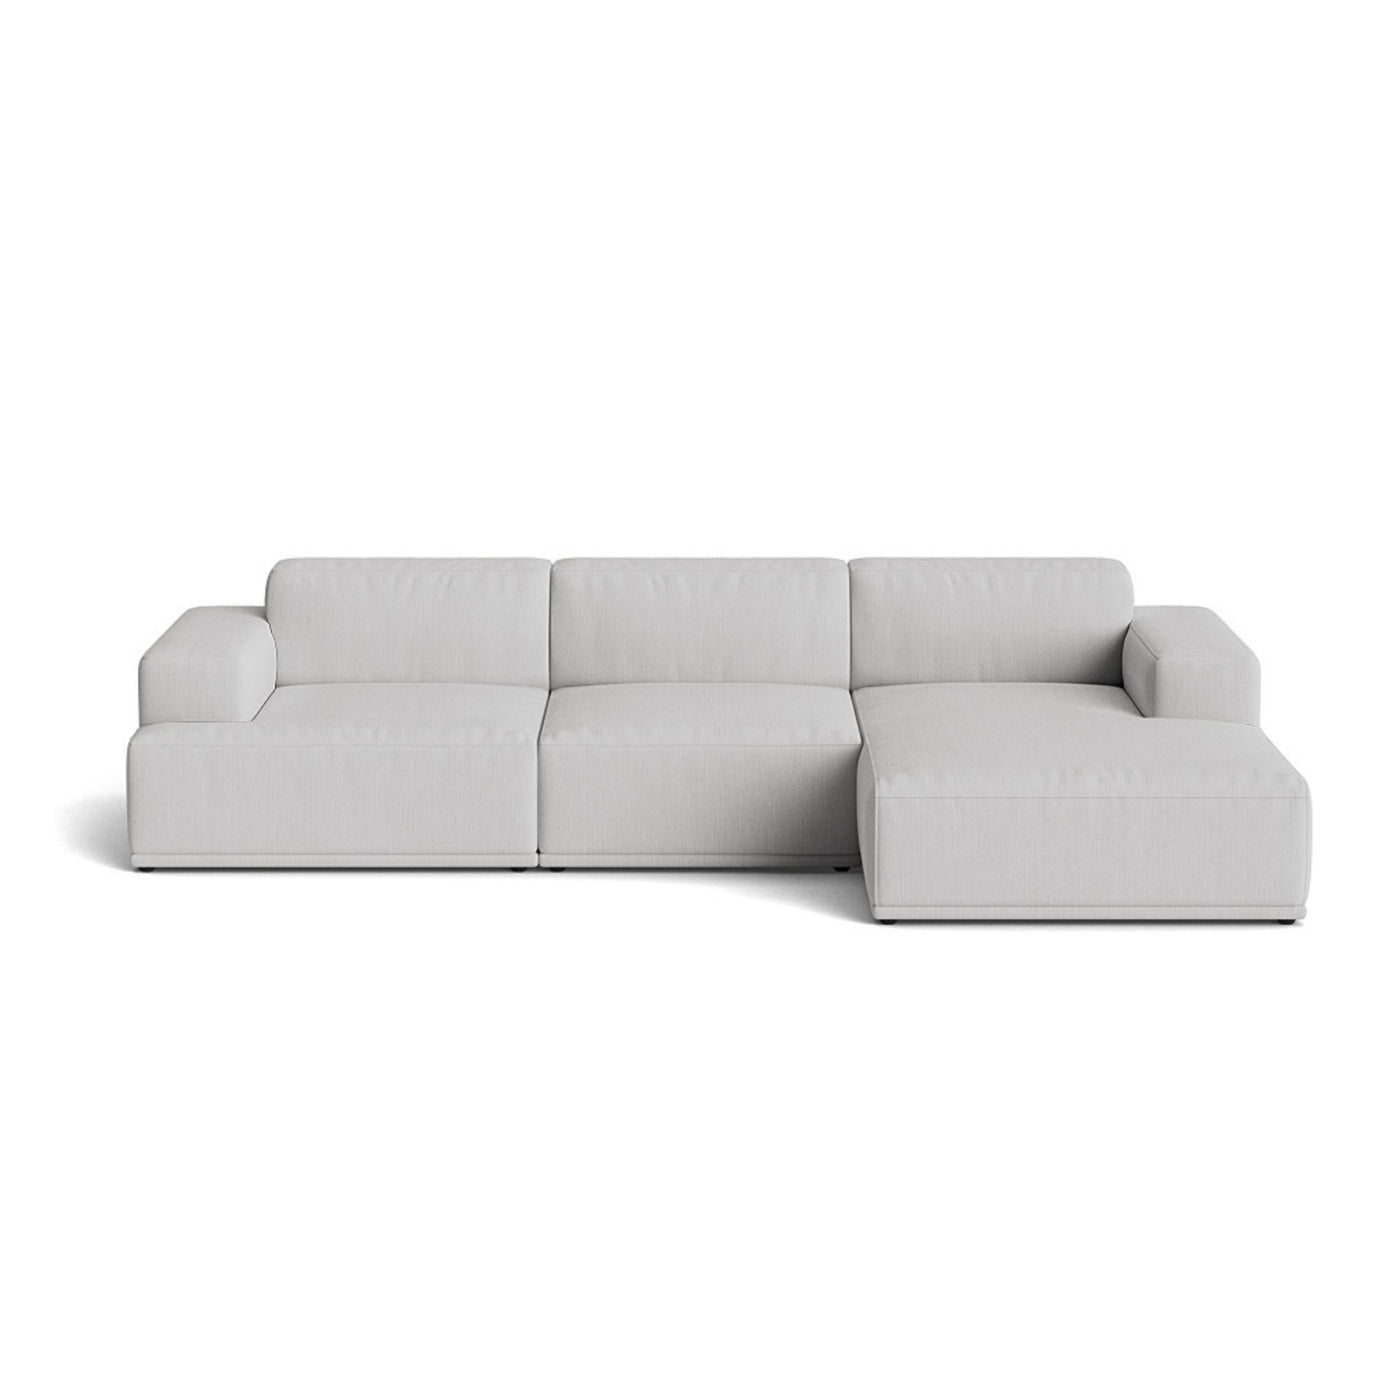 Muuto Connect Soft Modular 3 Seater Sofa, configuration 3. Made-to-order from someday designs. #colour_balder-132